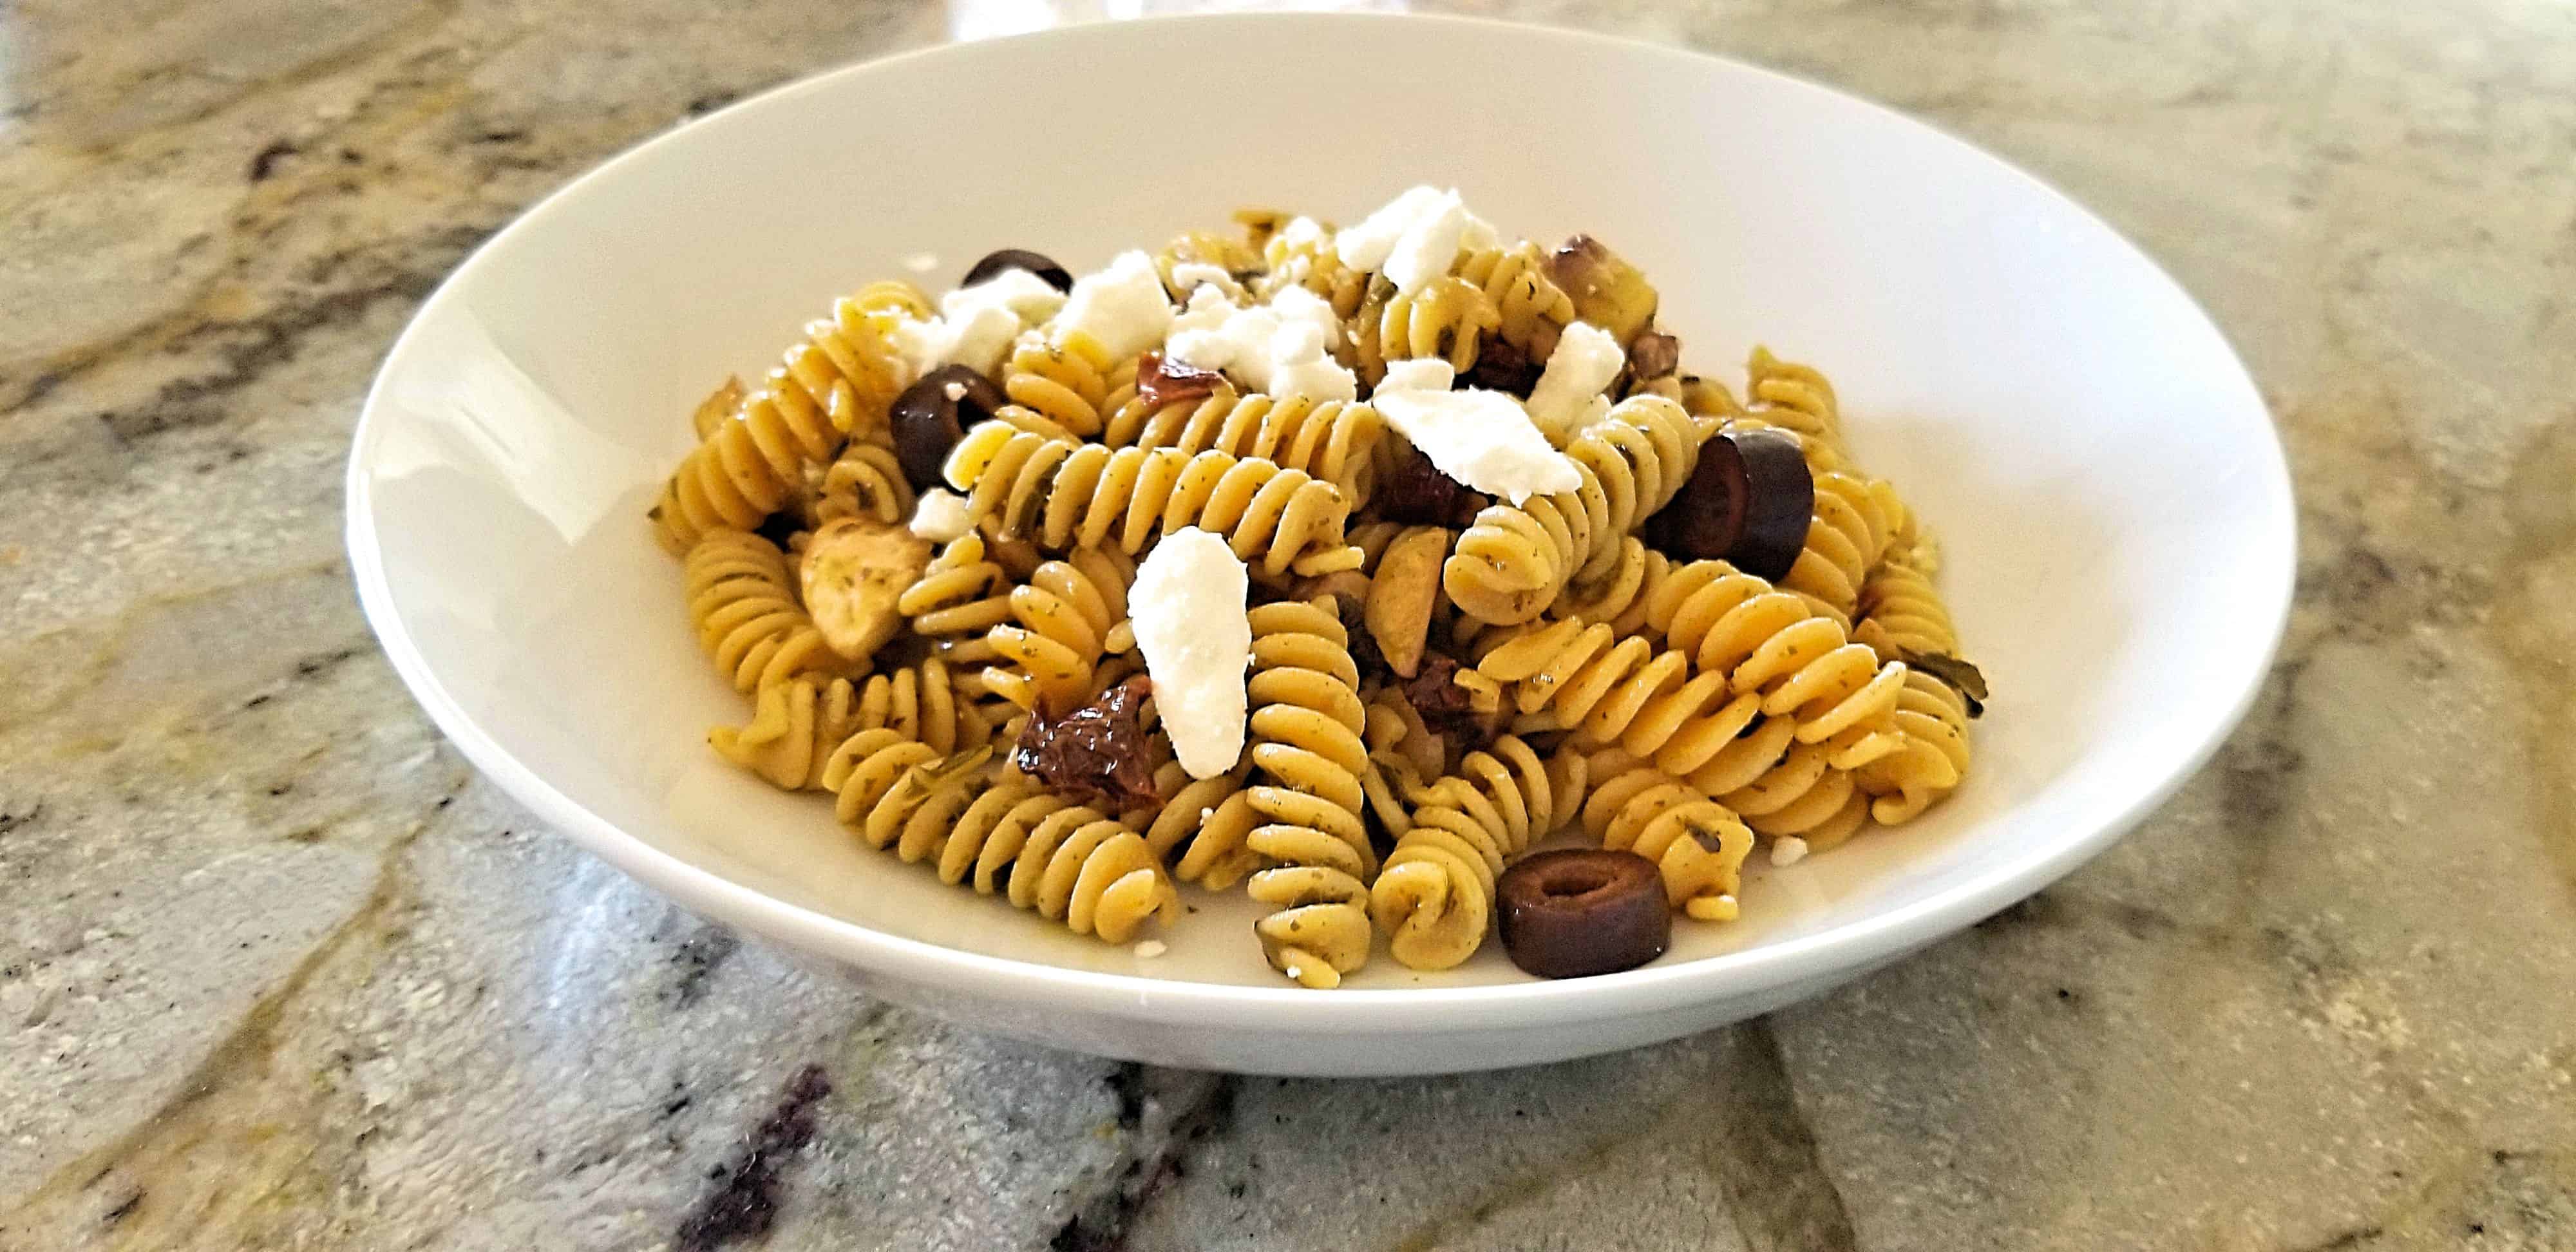 Find out about Barilla's chickpea pasta and grab our recipe on Made in a Pinch. Follow us on Pinterest for more healthy living tips and easy recipes!